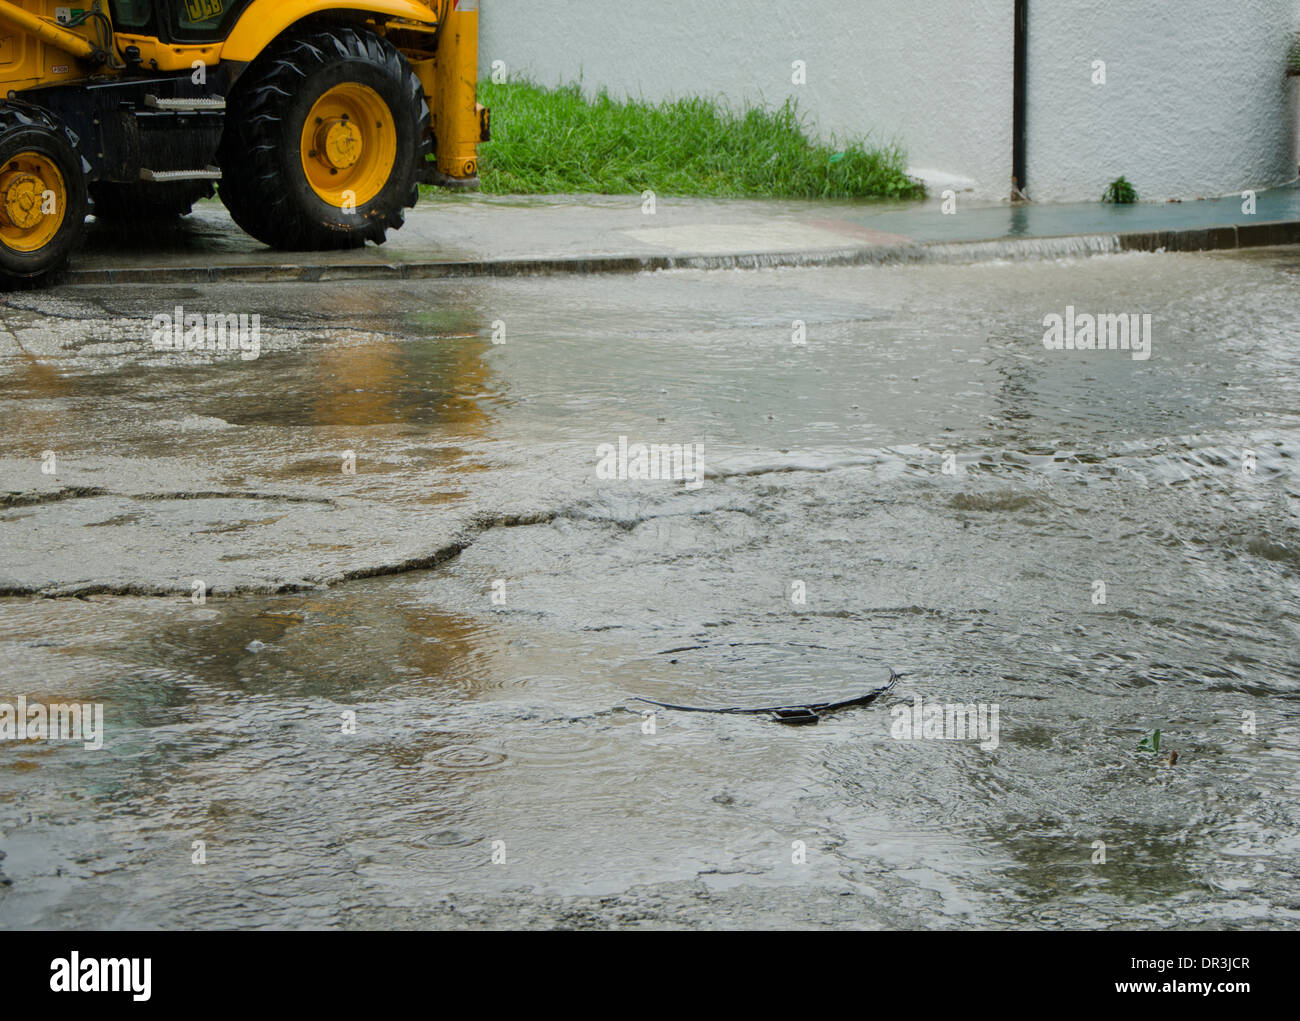 Street flooded after heavy rain storm, with truck in background. Spain. Stock Photo